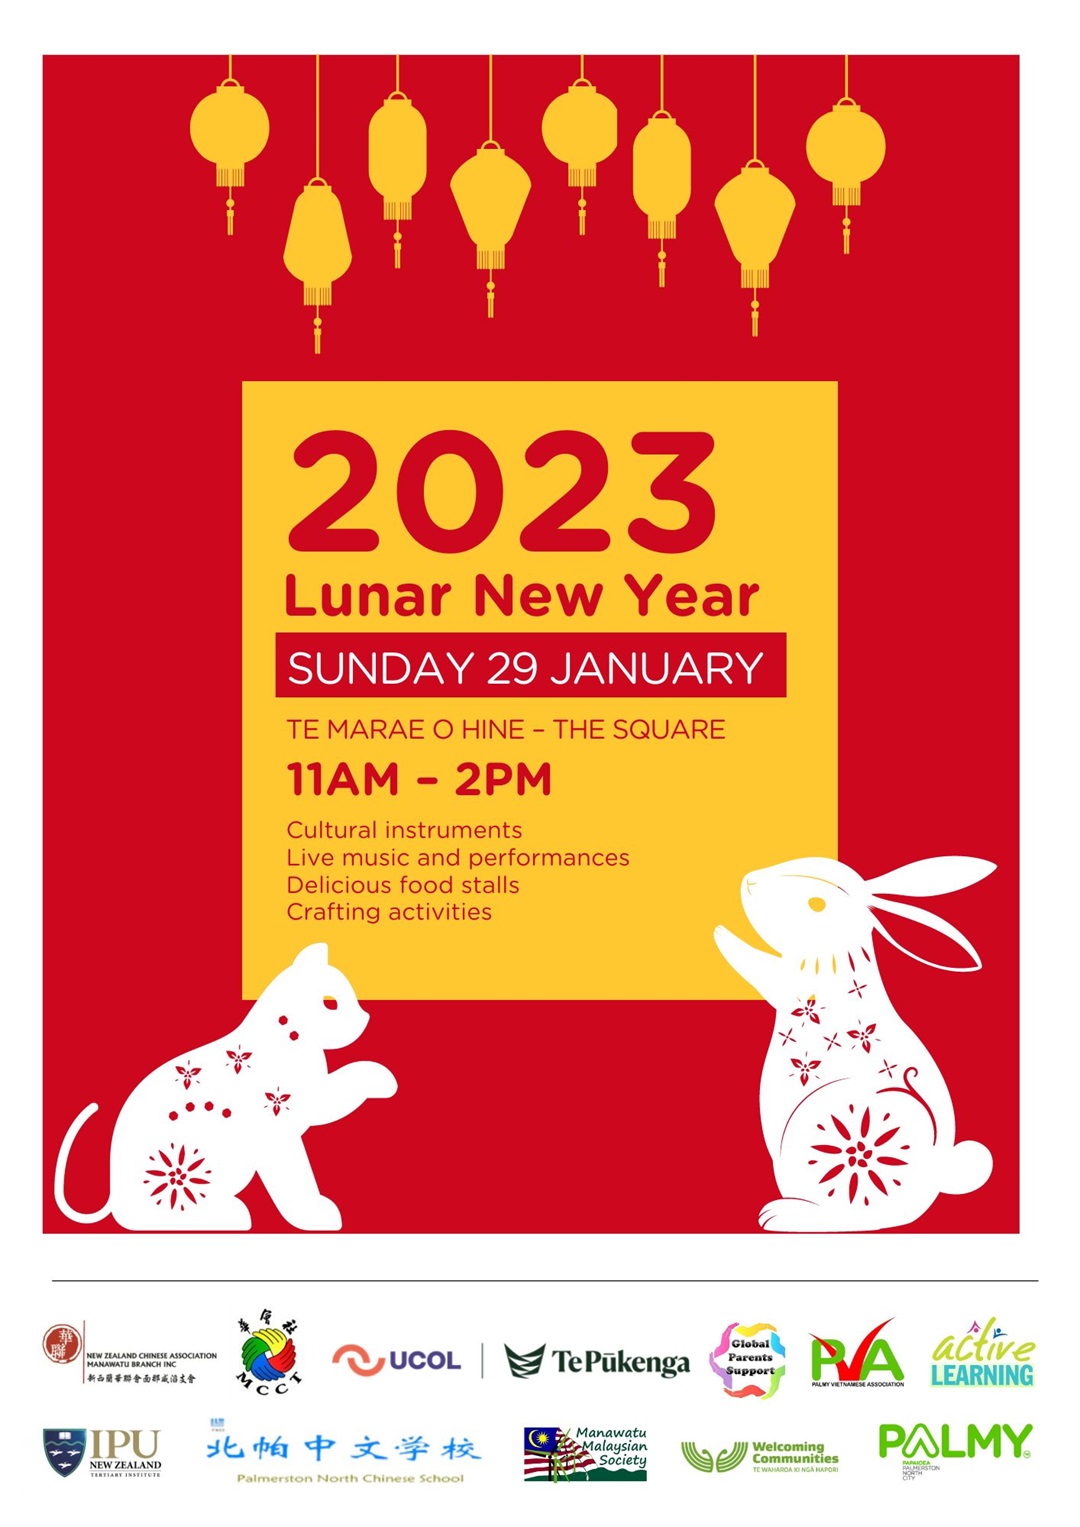 Poster of the 2023 Lunar New Year